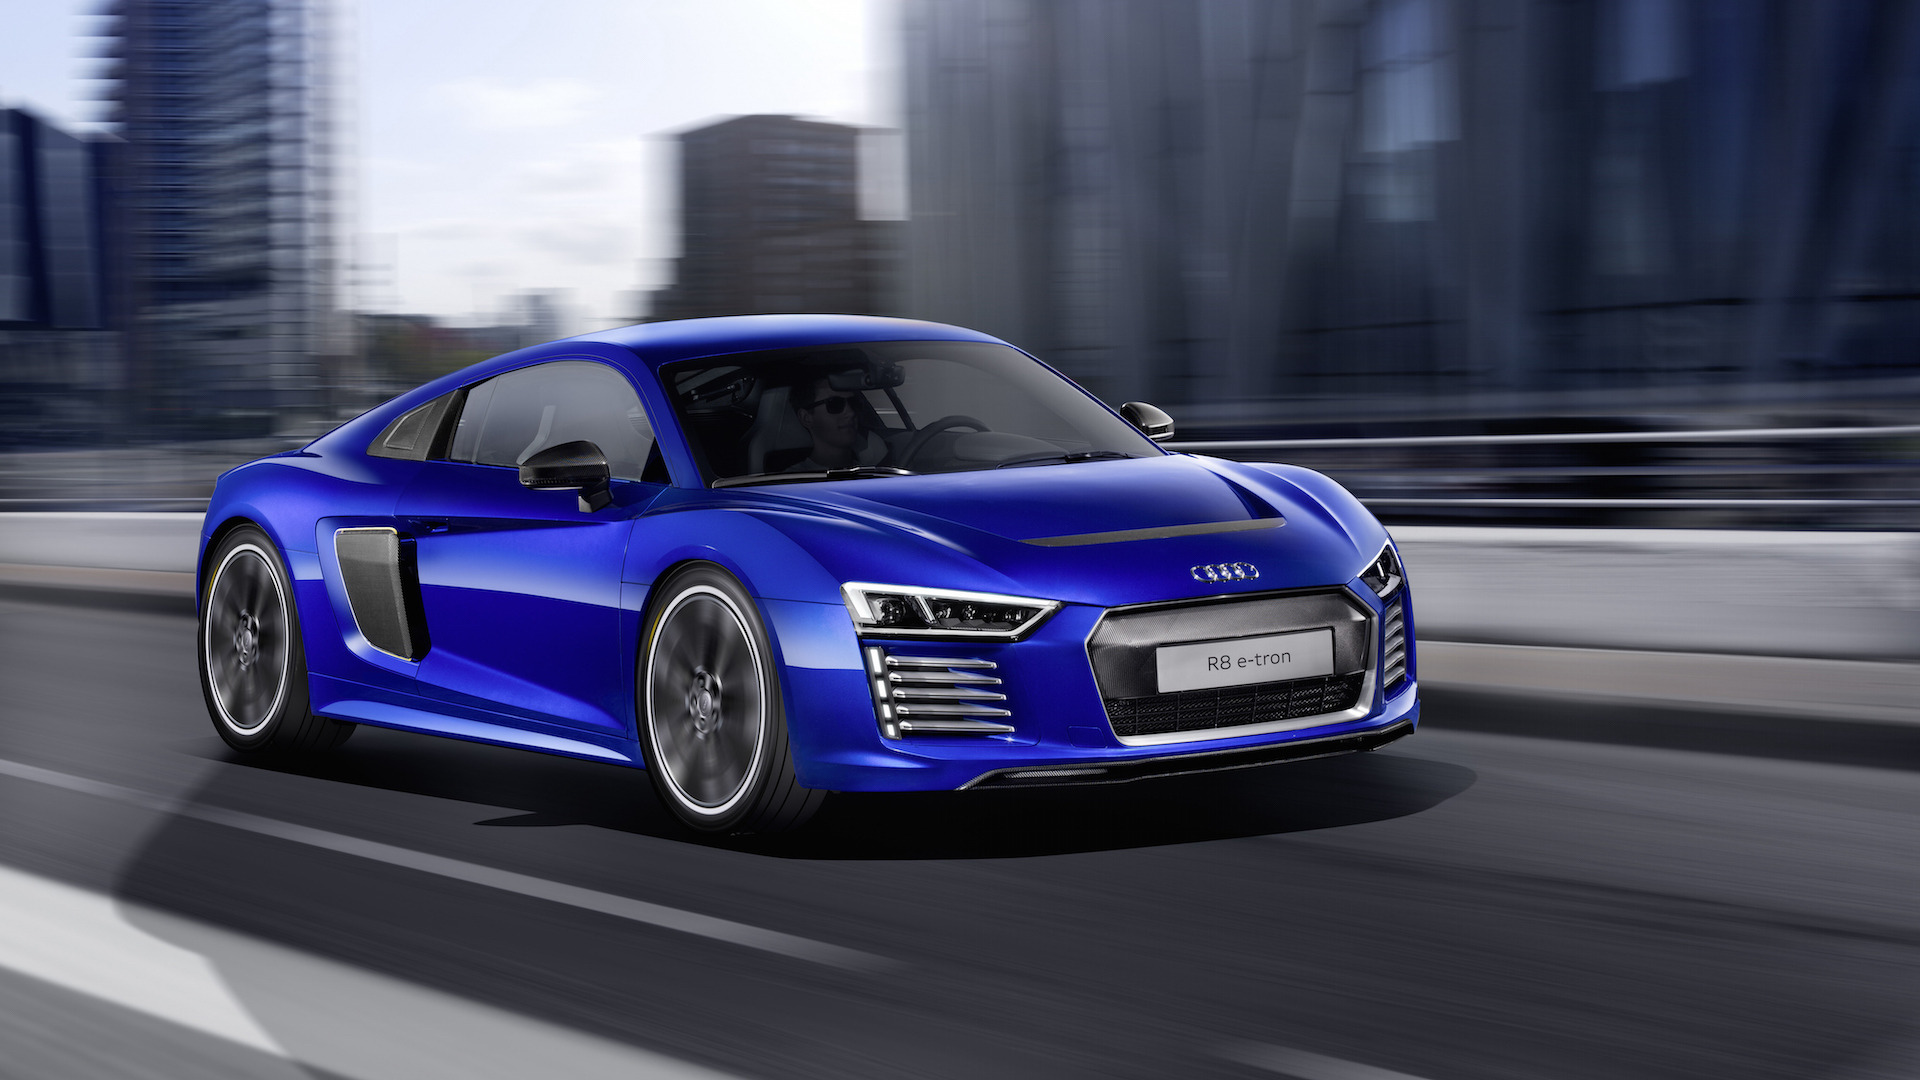 Audi R8 E Tron Electric Supercar Discontinued After Less Than